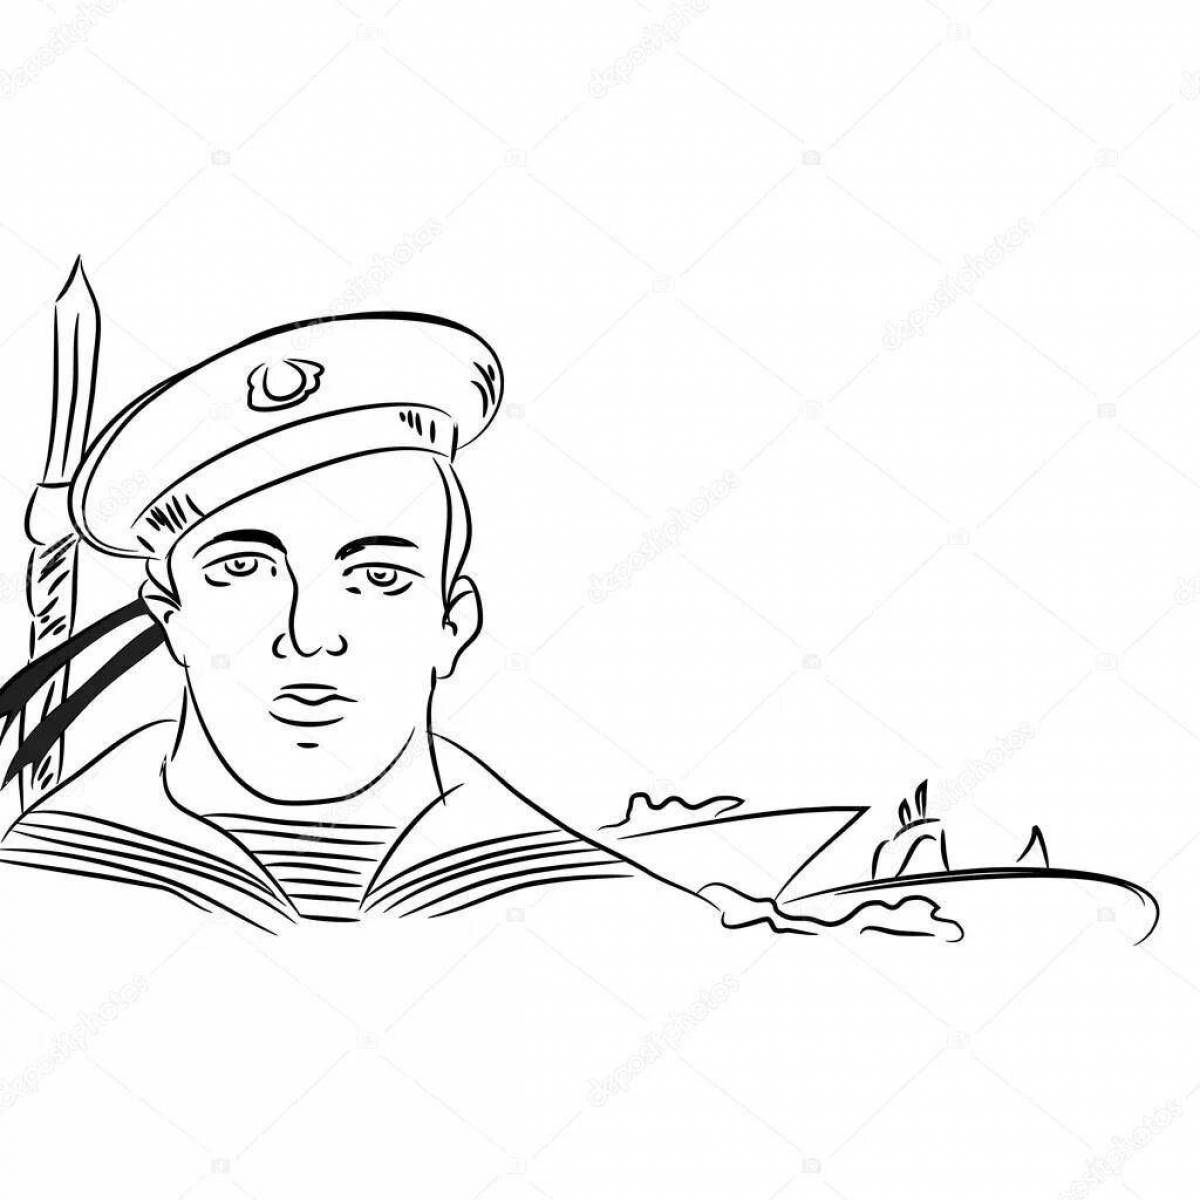 Coloring page graceful military portrait